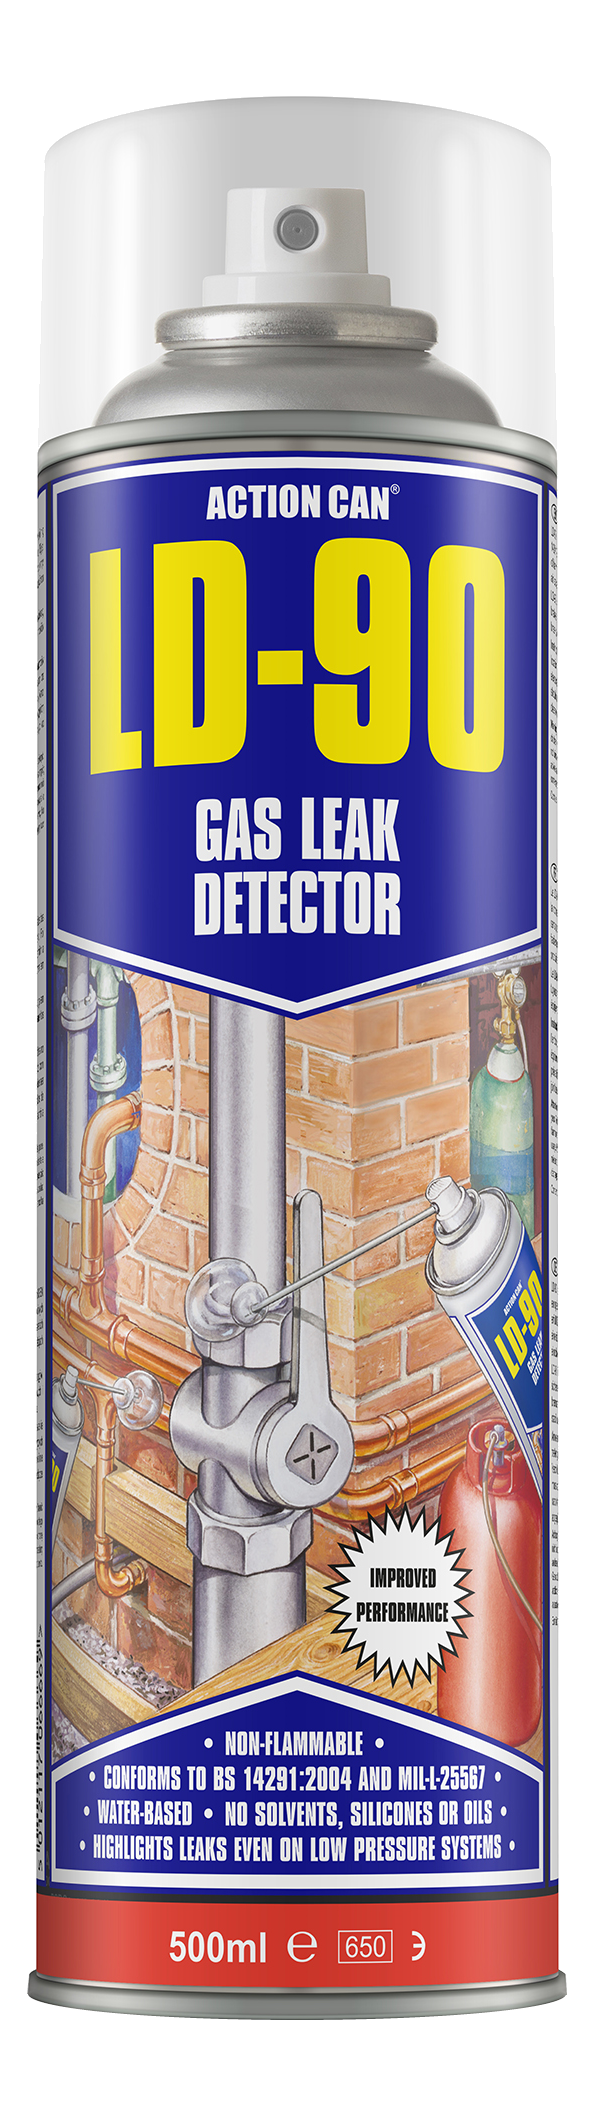 Action Can LD-90 Gas Leak Detector 